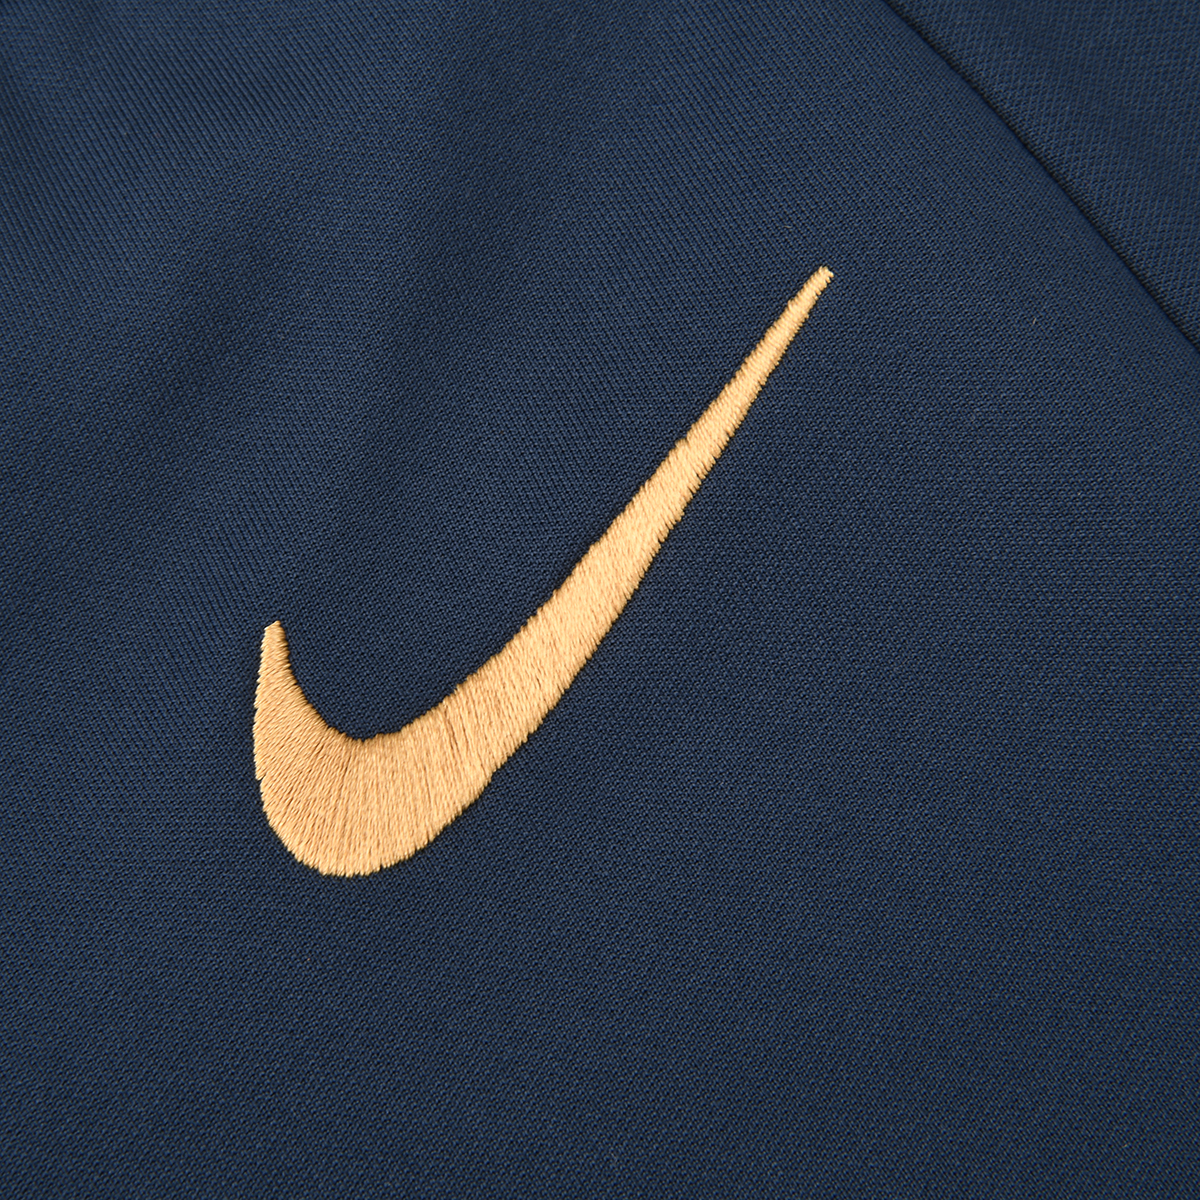 Campera Nike Fff Academy Pro,  image number null